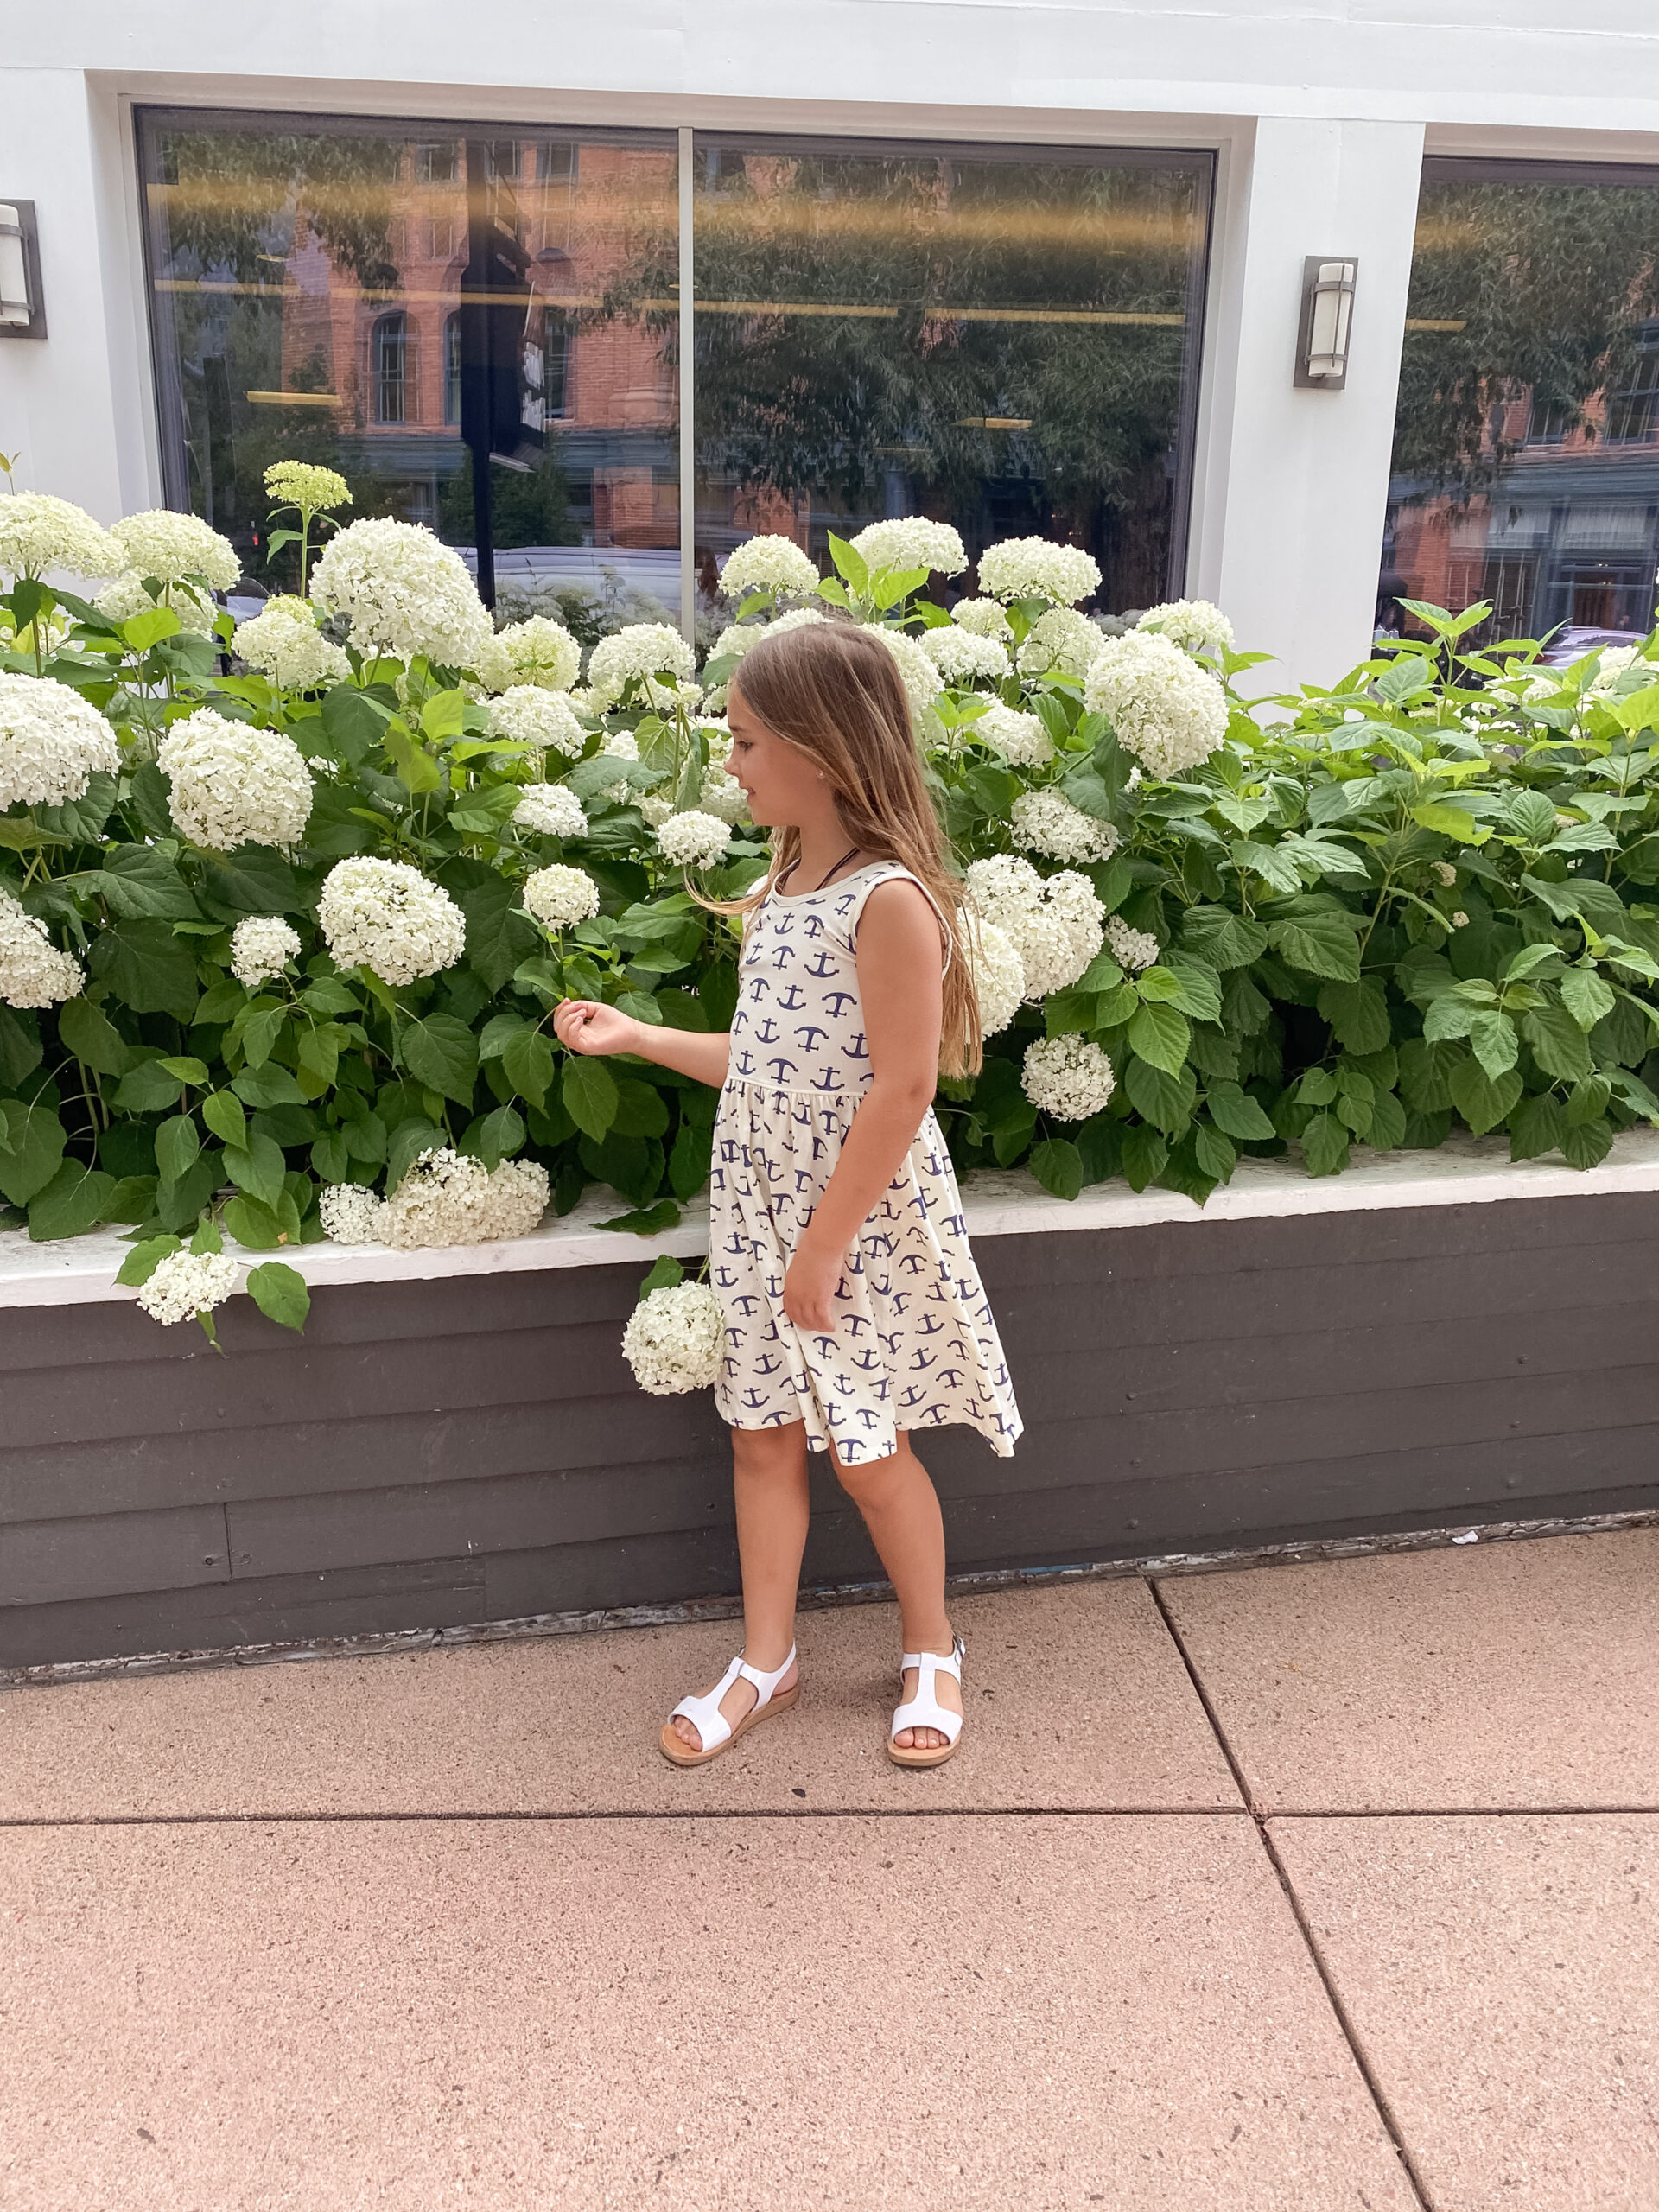 exlporing downtown Aspen is a great way to spend an afternoon. So many fun things to explore and see #thingstodoinaspenwithkids #exploreapsen #visitcolorado